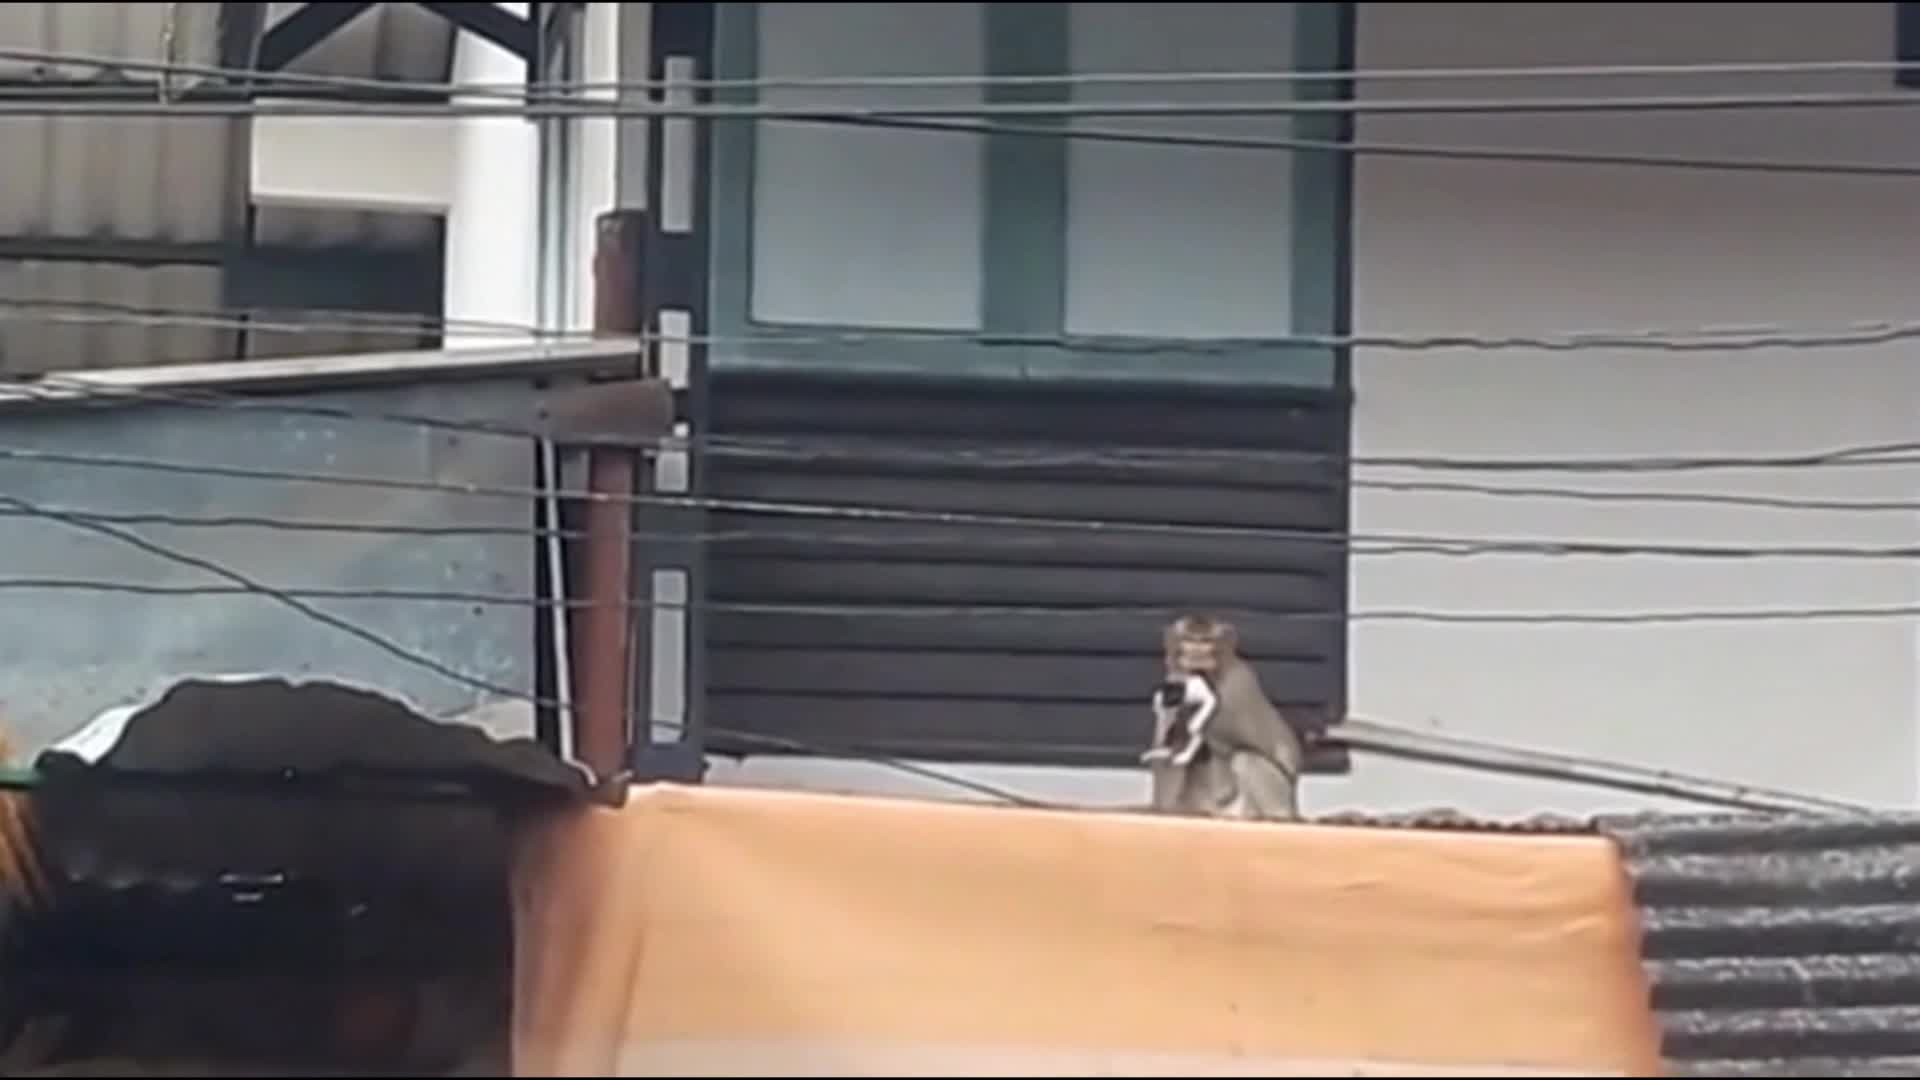 A monkey in Thailand kidnapped a kitten and took it away. Its whereabouts remain unknown.